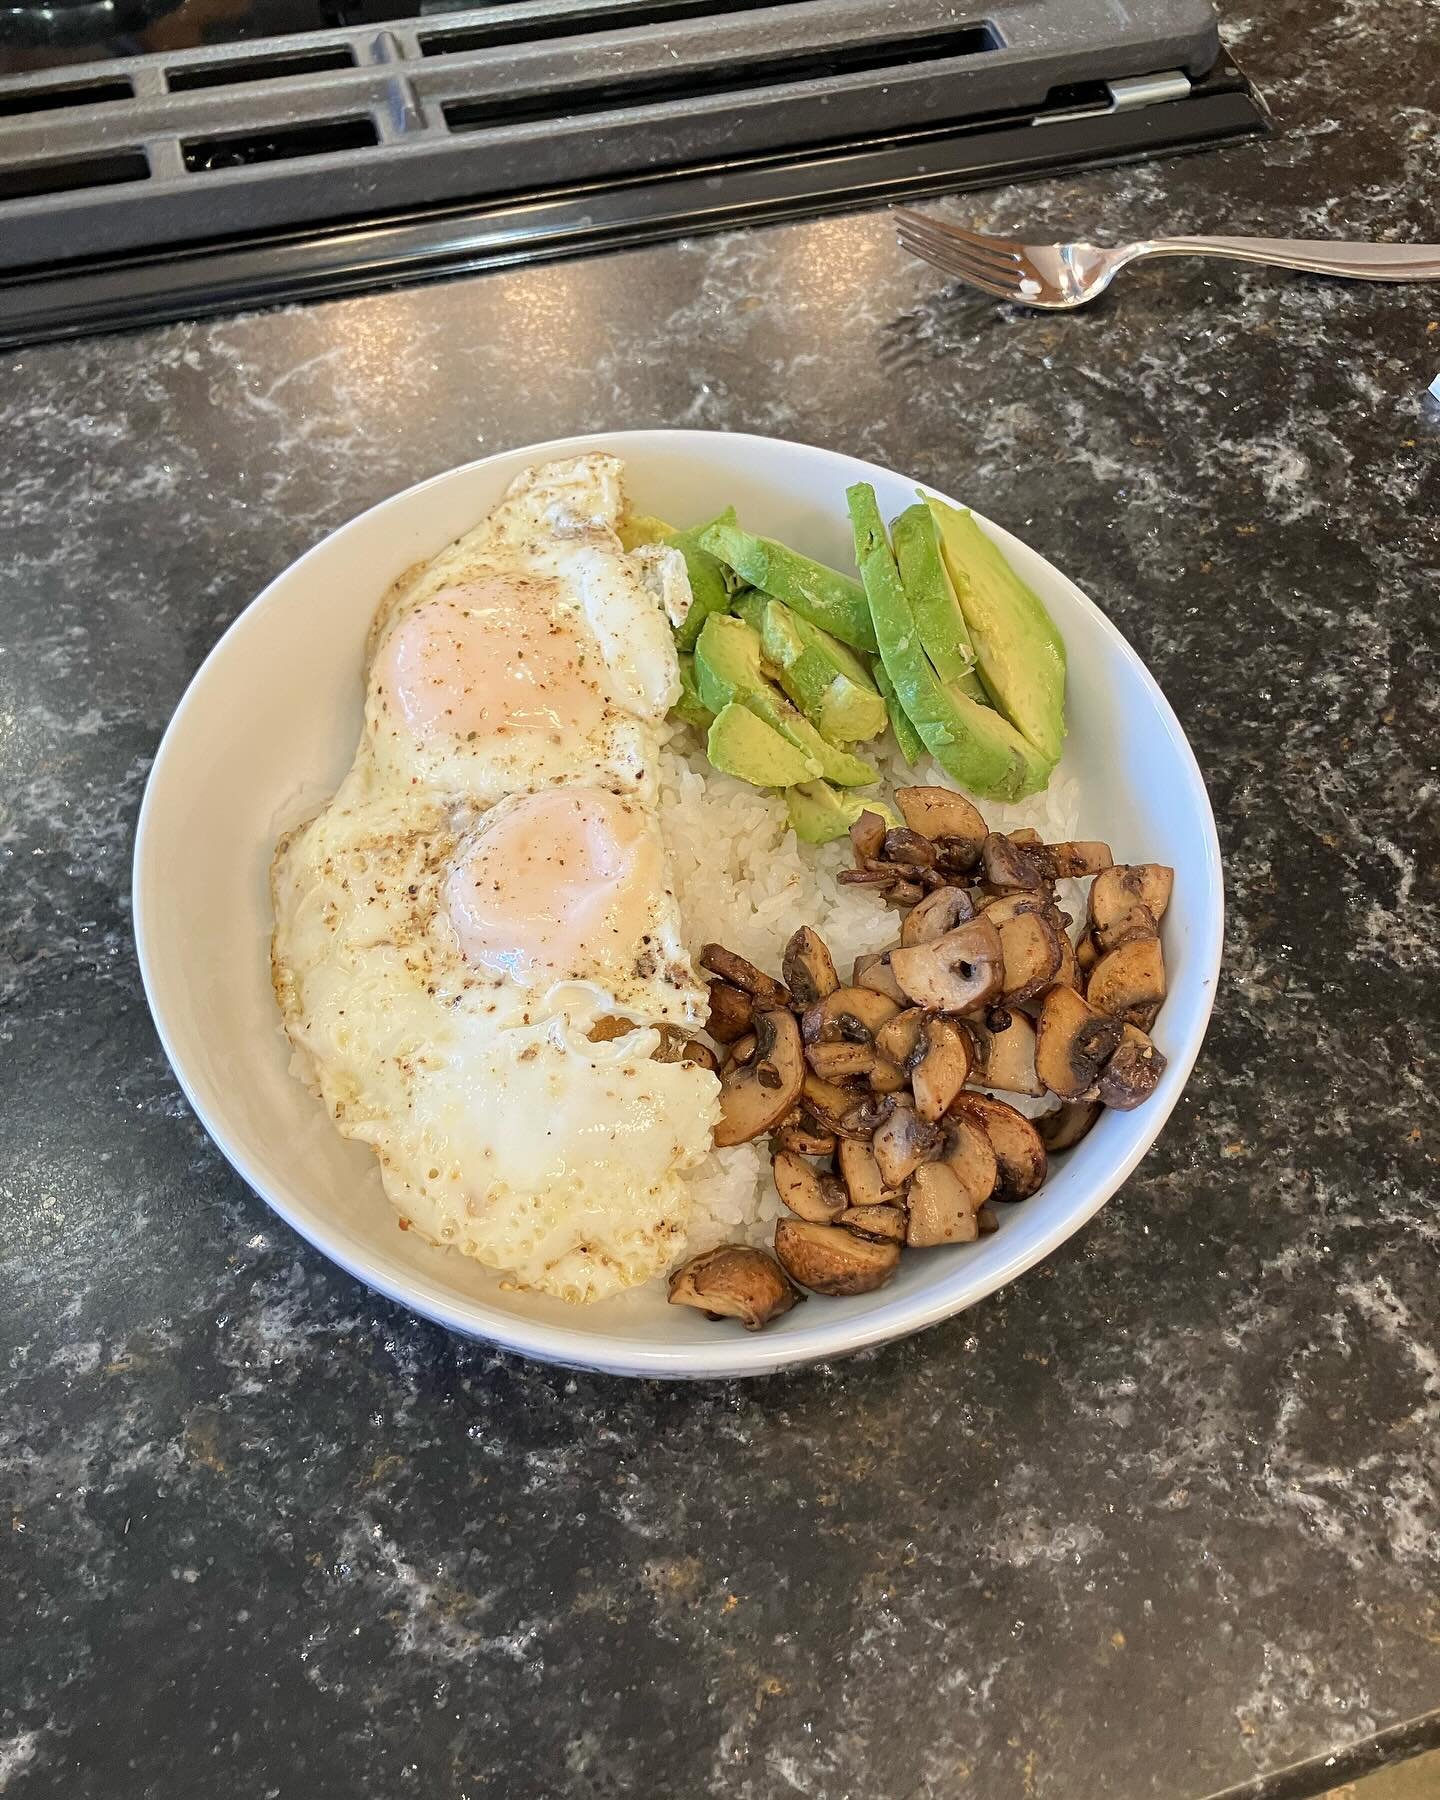 This was a delicious rice bowl from Sunday!